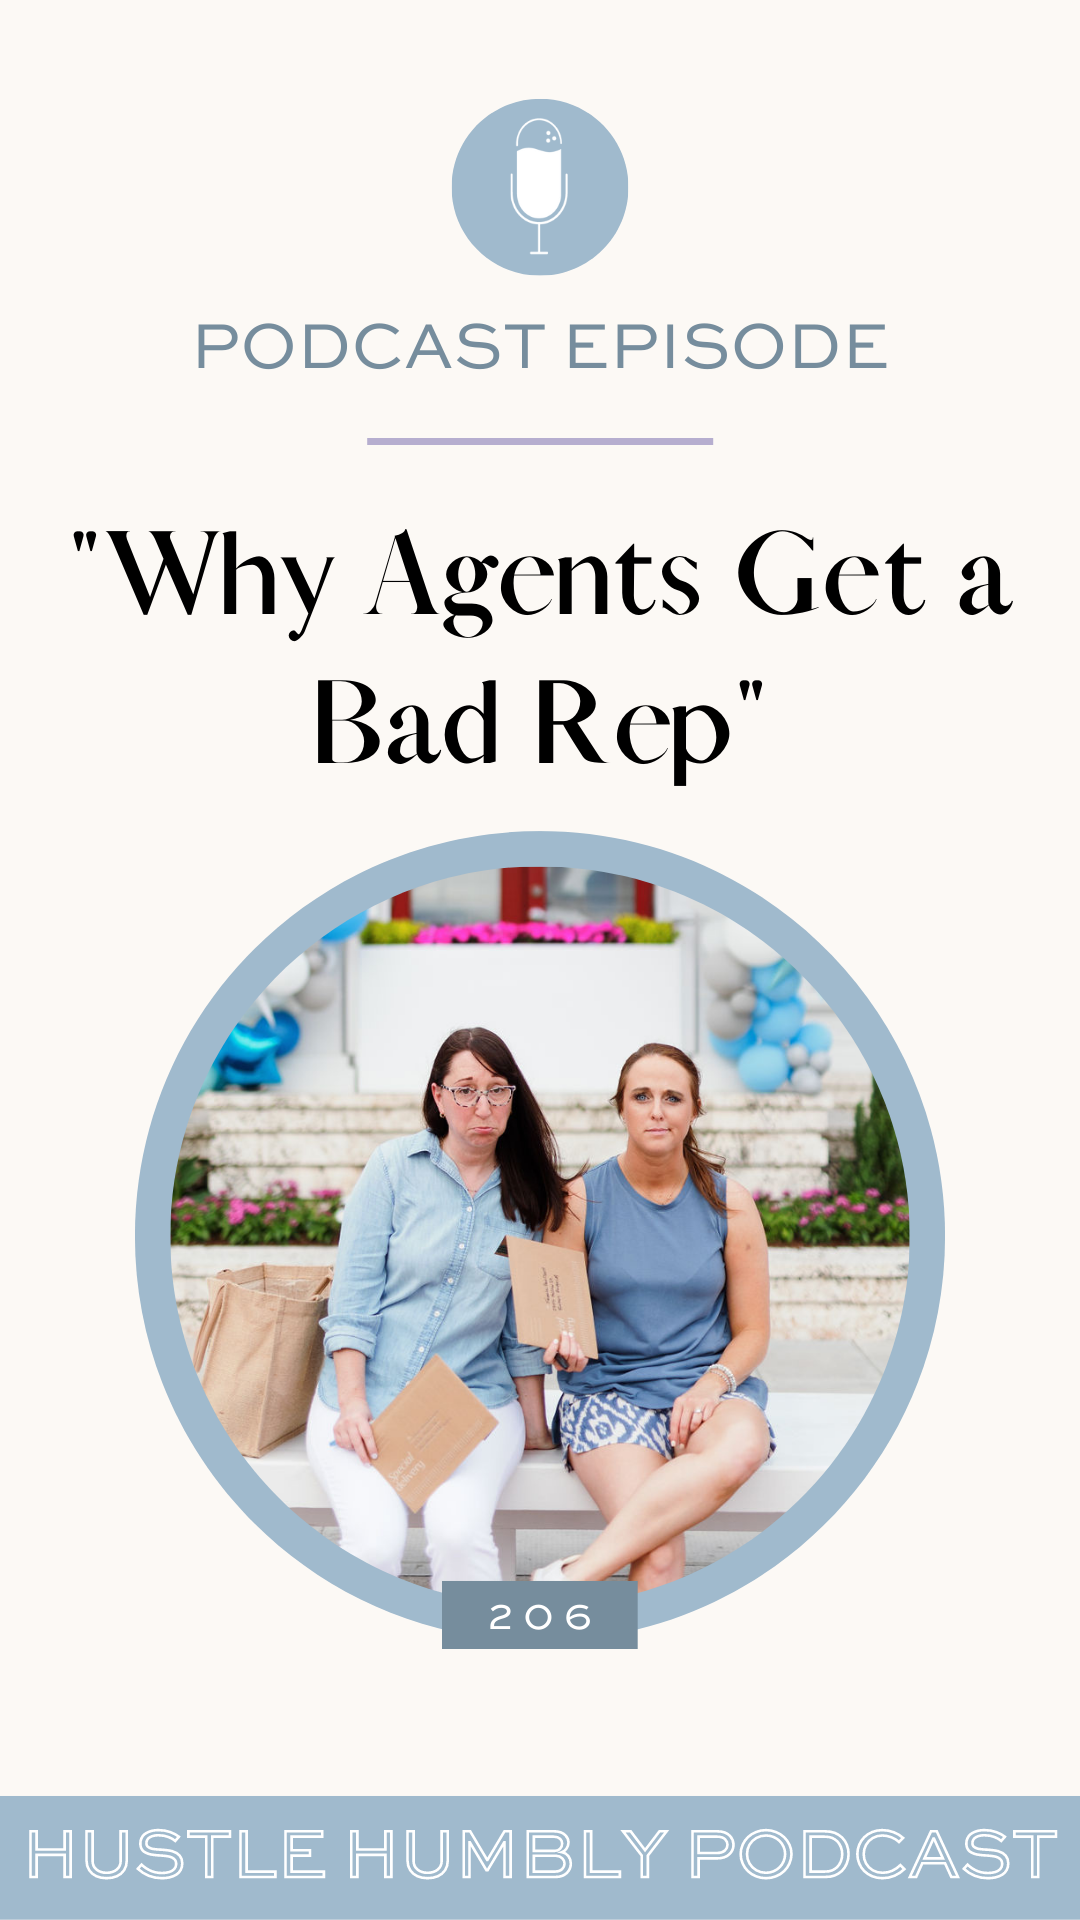 Alissa and Katy discuss the reasons why real estate agents have a bad reputation and how to improve professionalism in the industry.